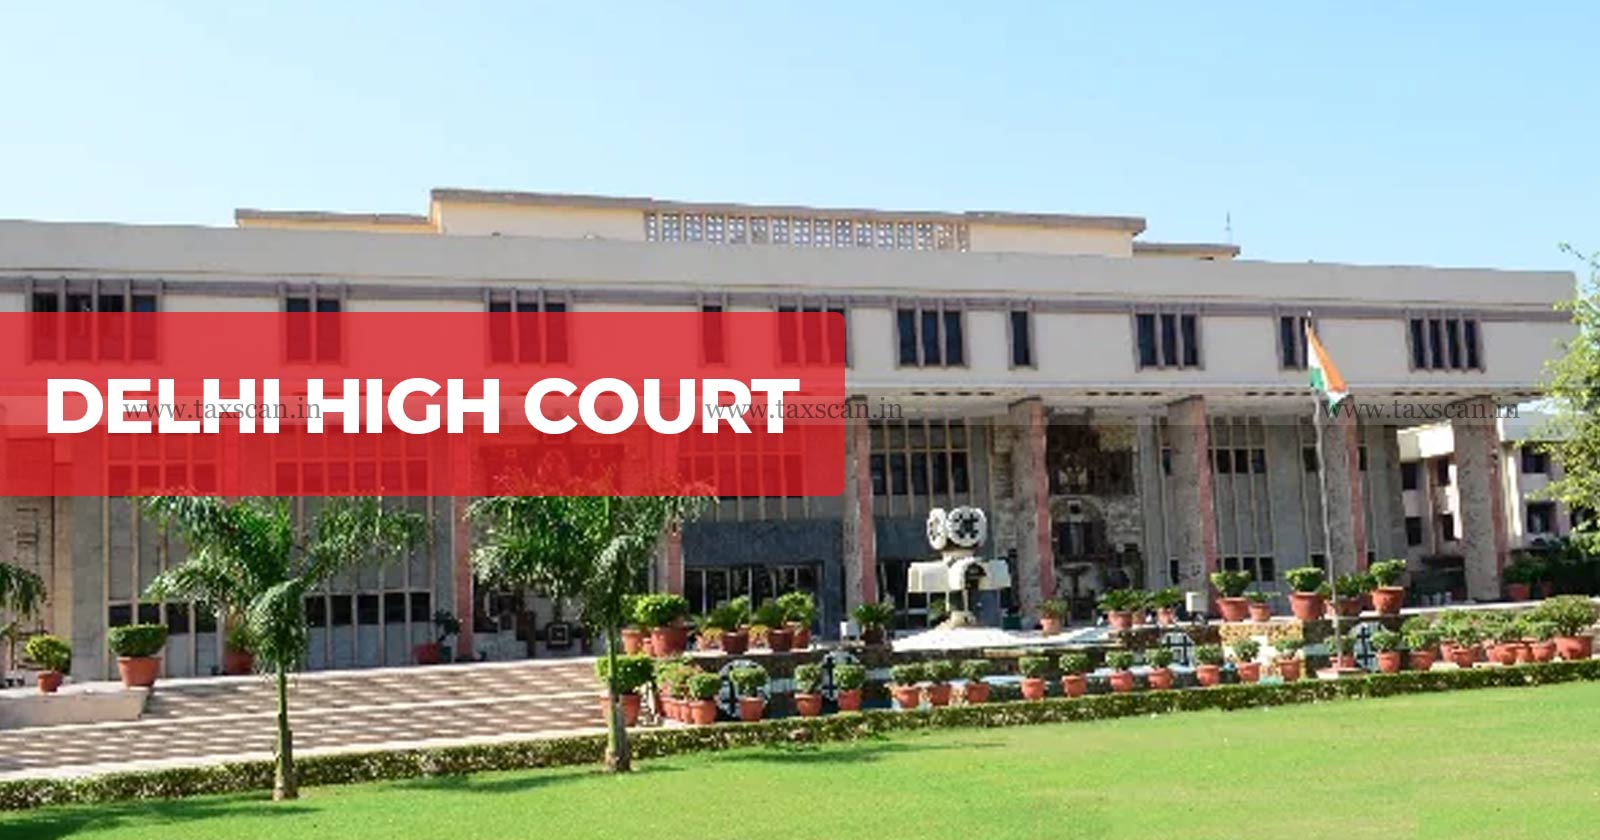 Delhi High Court Condoned - Delay in Re - filing Appeals - Commissioner of Income Tax Refrains Entertaining Issues Raised Statutory Authority - TAXSCAN